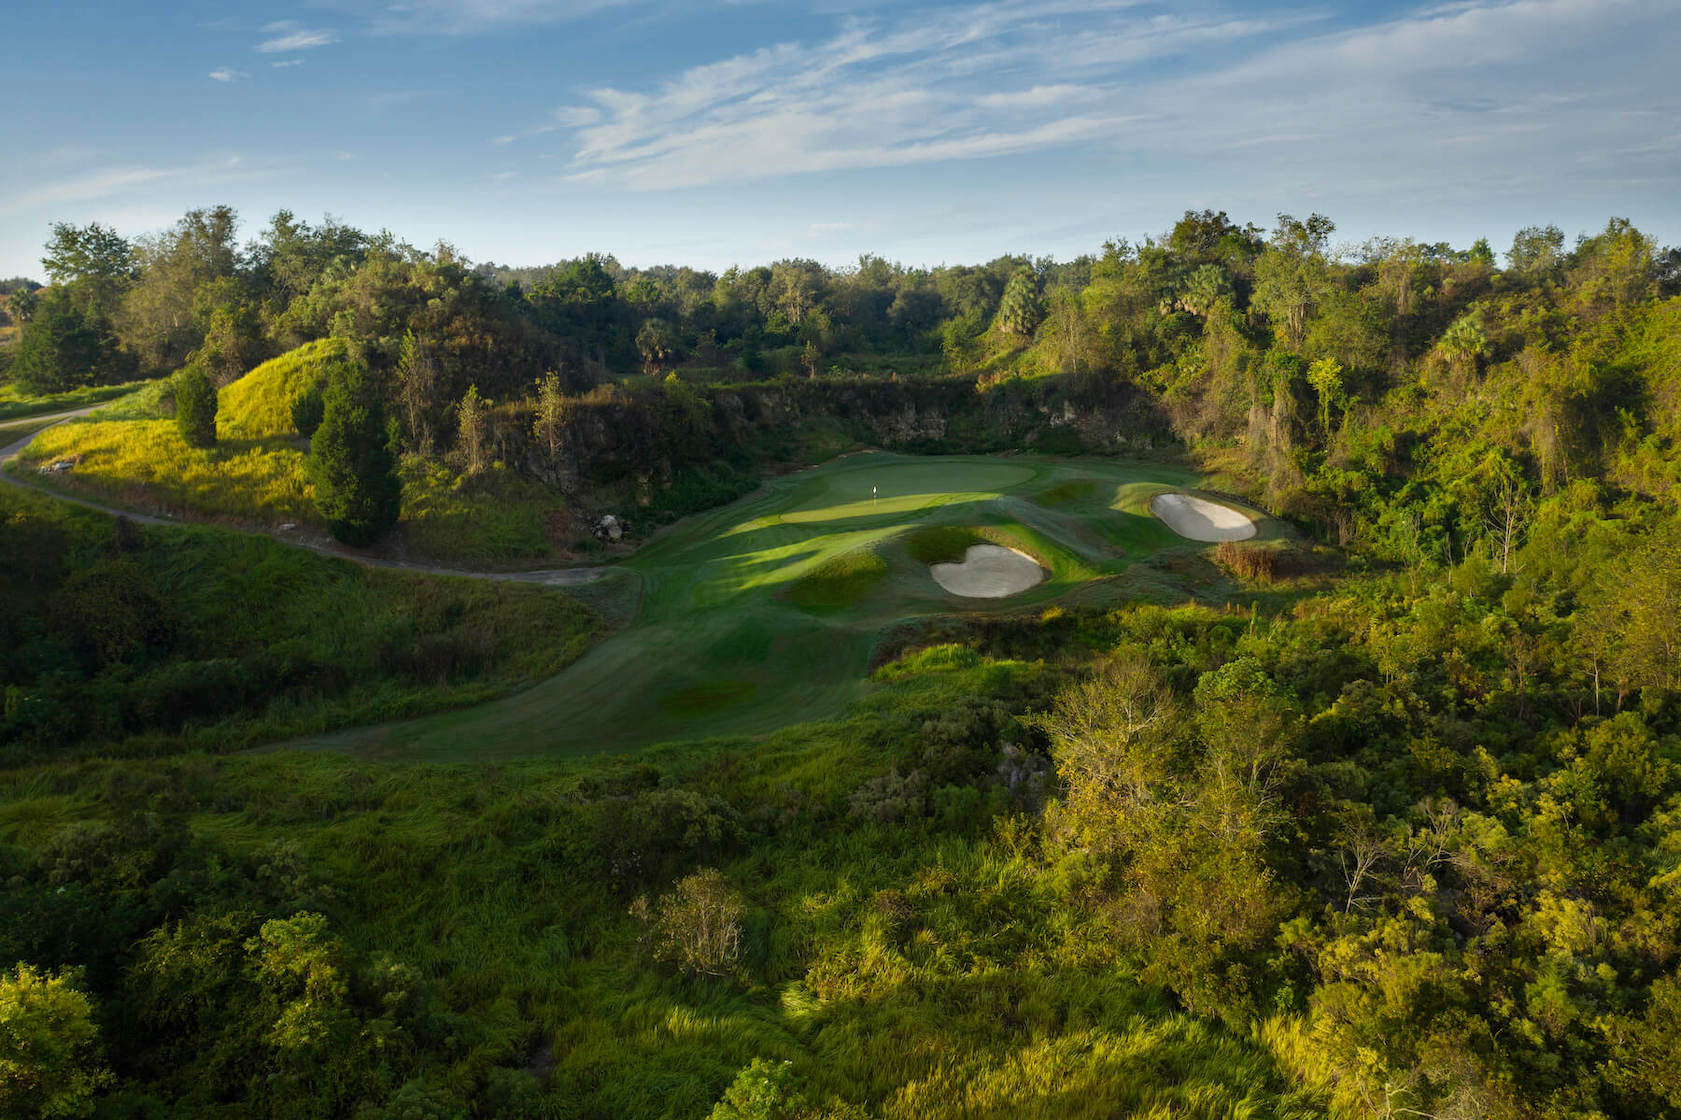 The Quarry Golf Course is the private course in central Florida